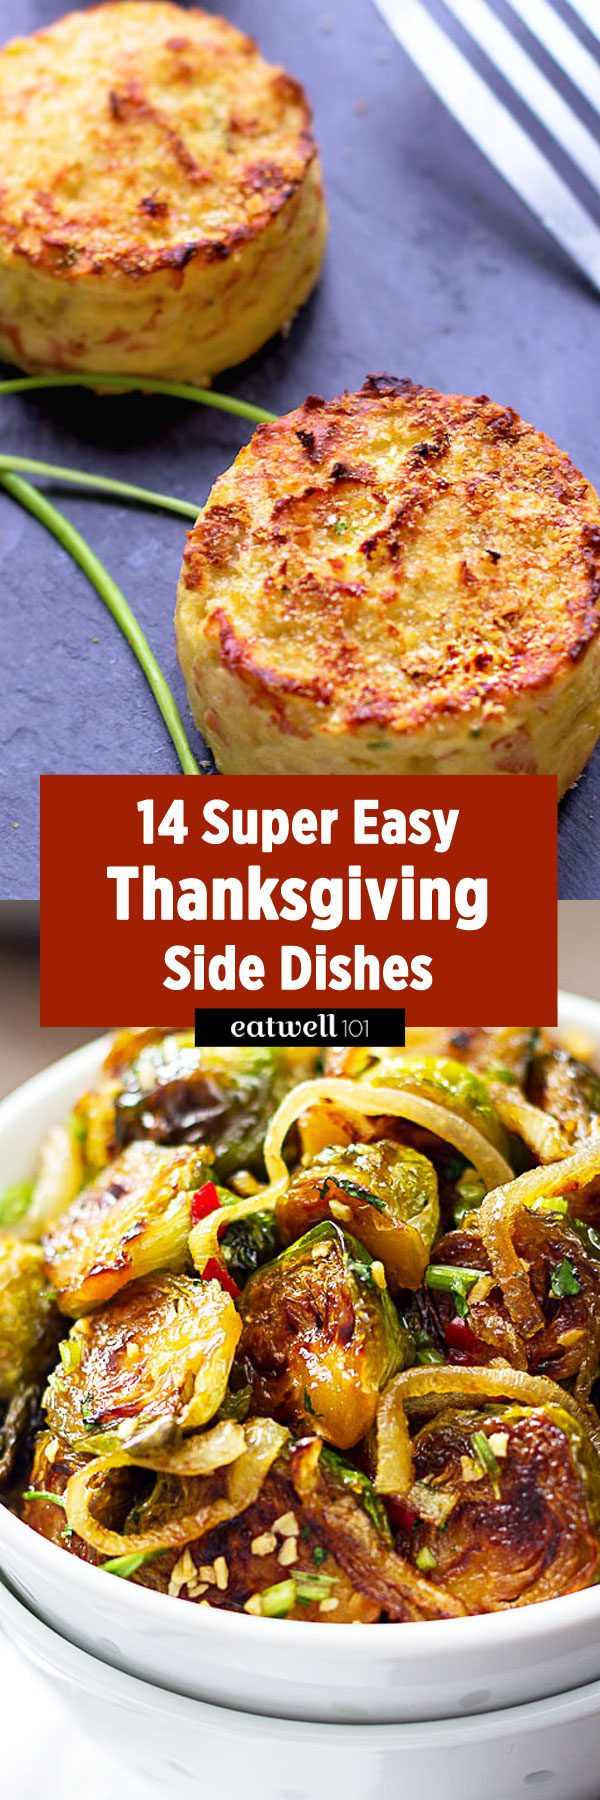 Side Dishes For Thanksgiving Easy
 Up Your Thanksgiving With These Super Easy Side Dishes